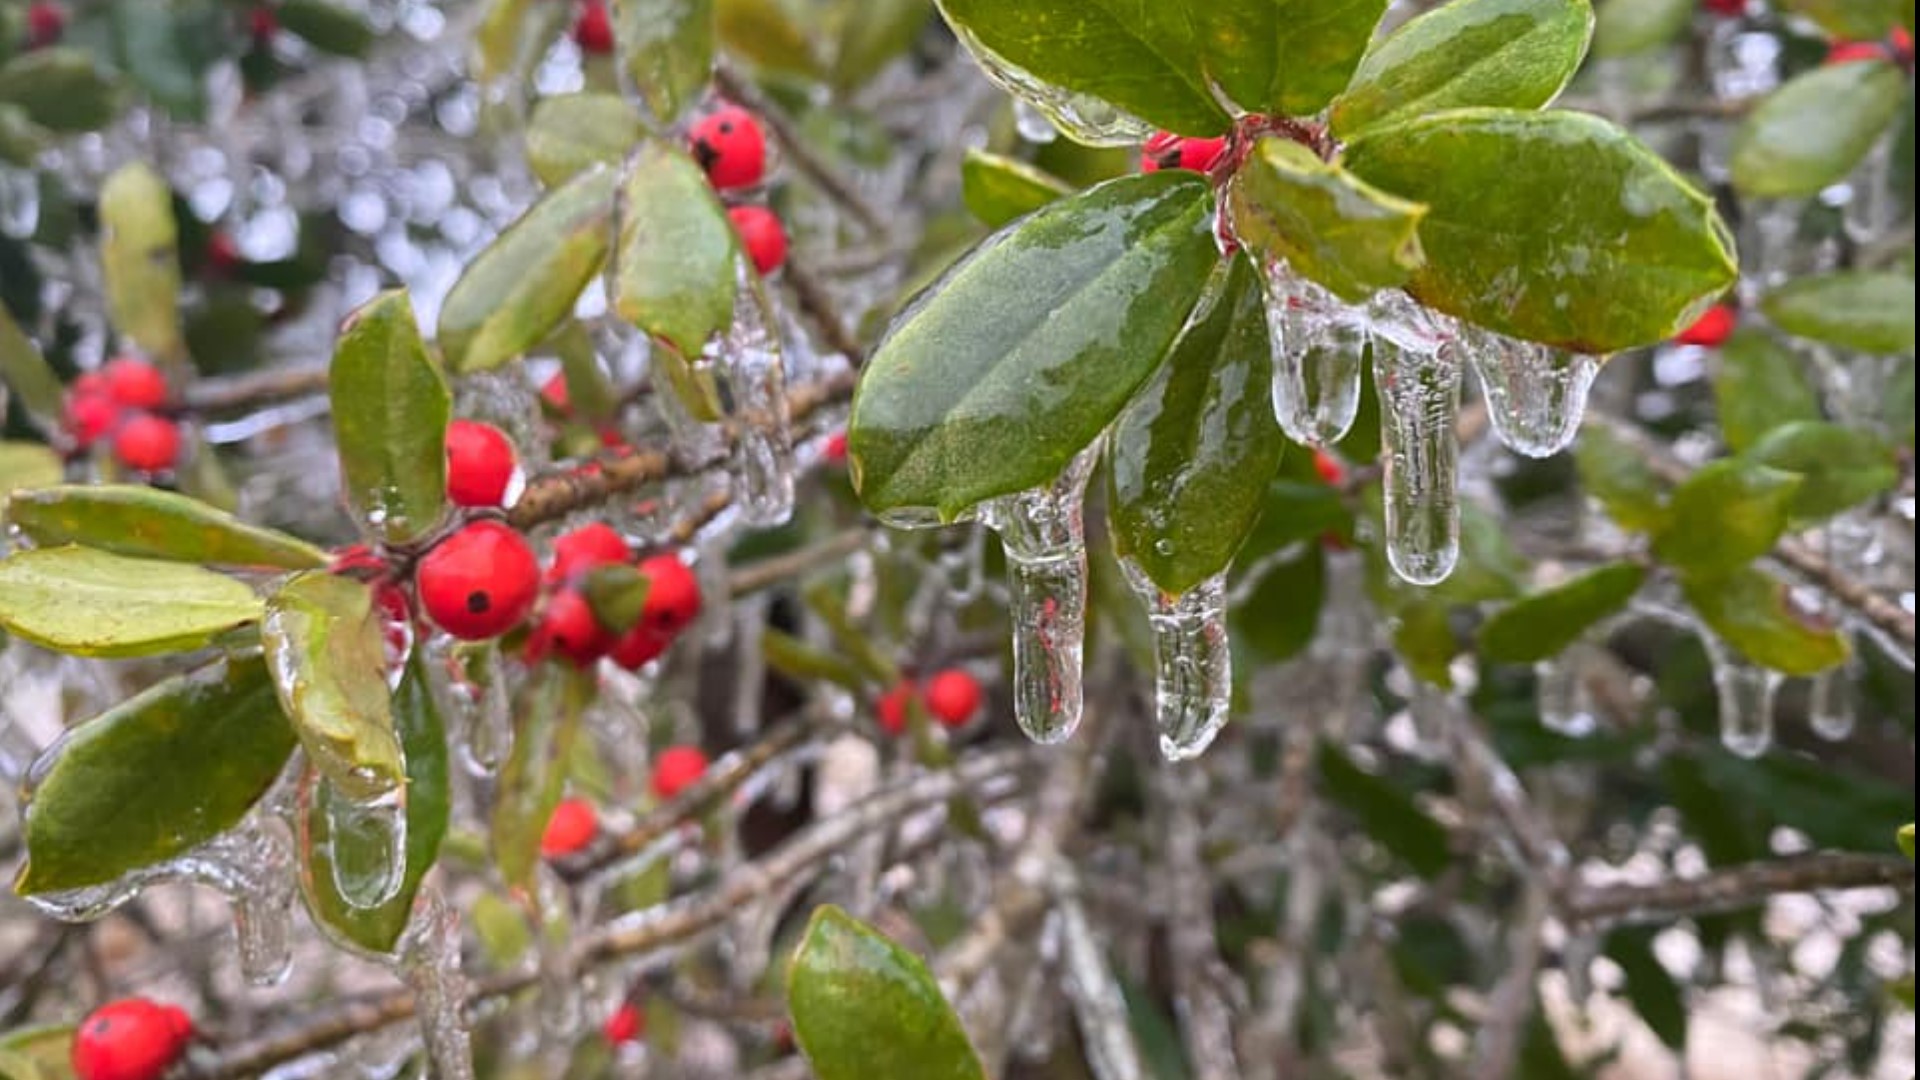 South Carolina winter weather pictures shared by WLTX viewers